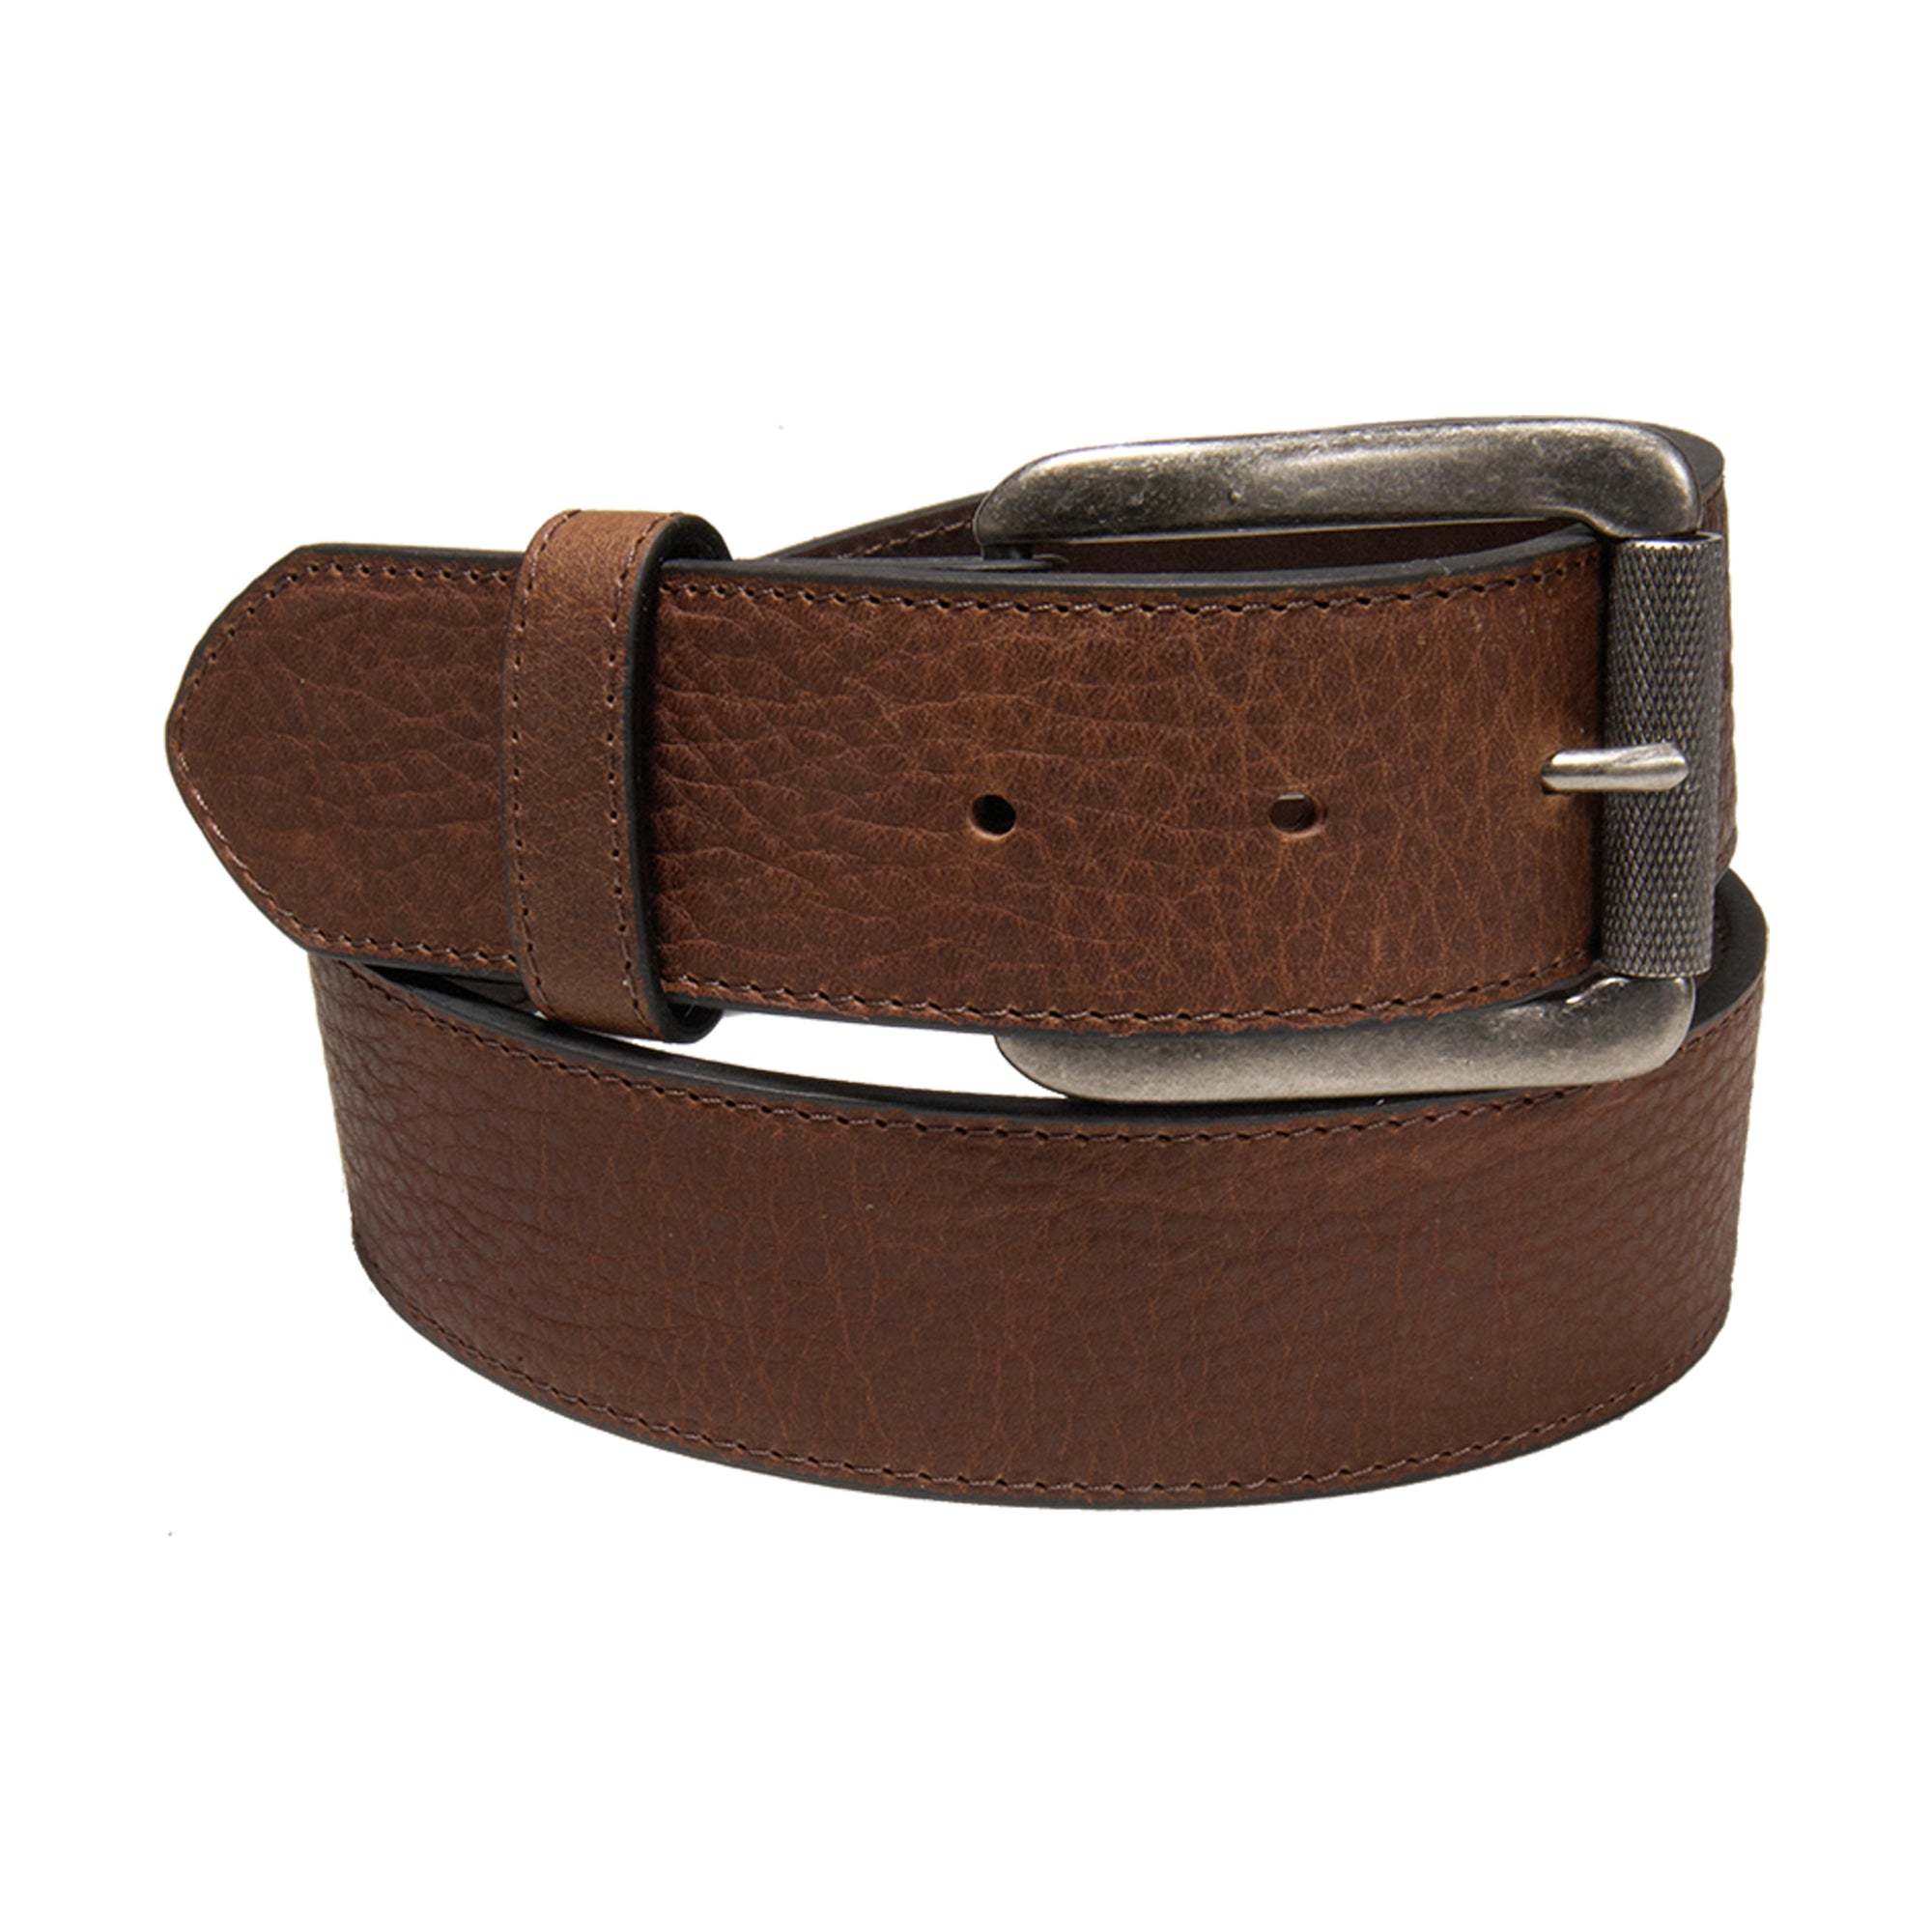 AndWeste Leather Belts